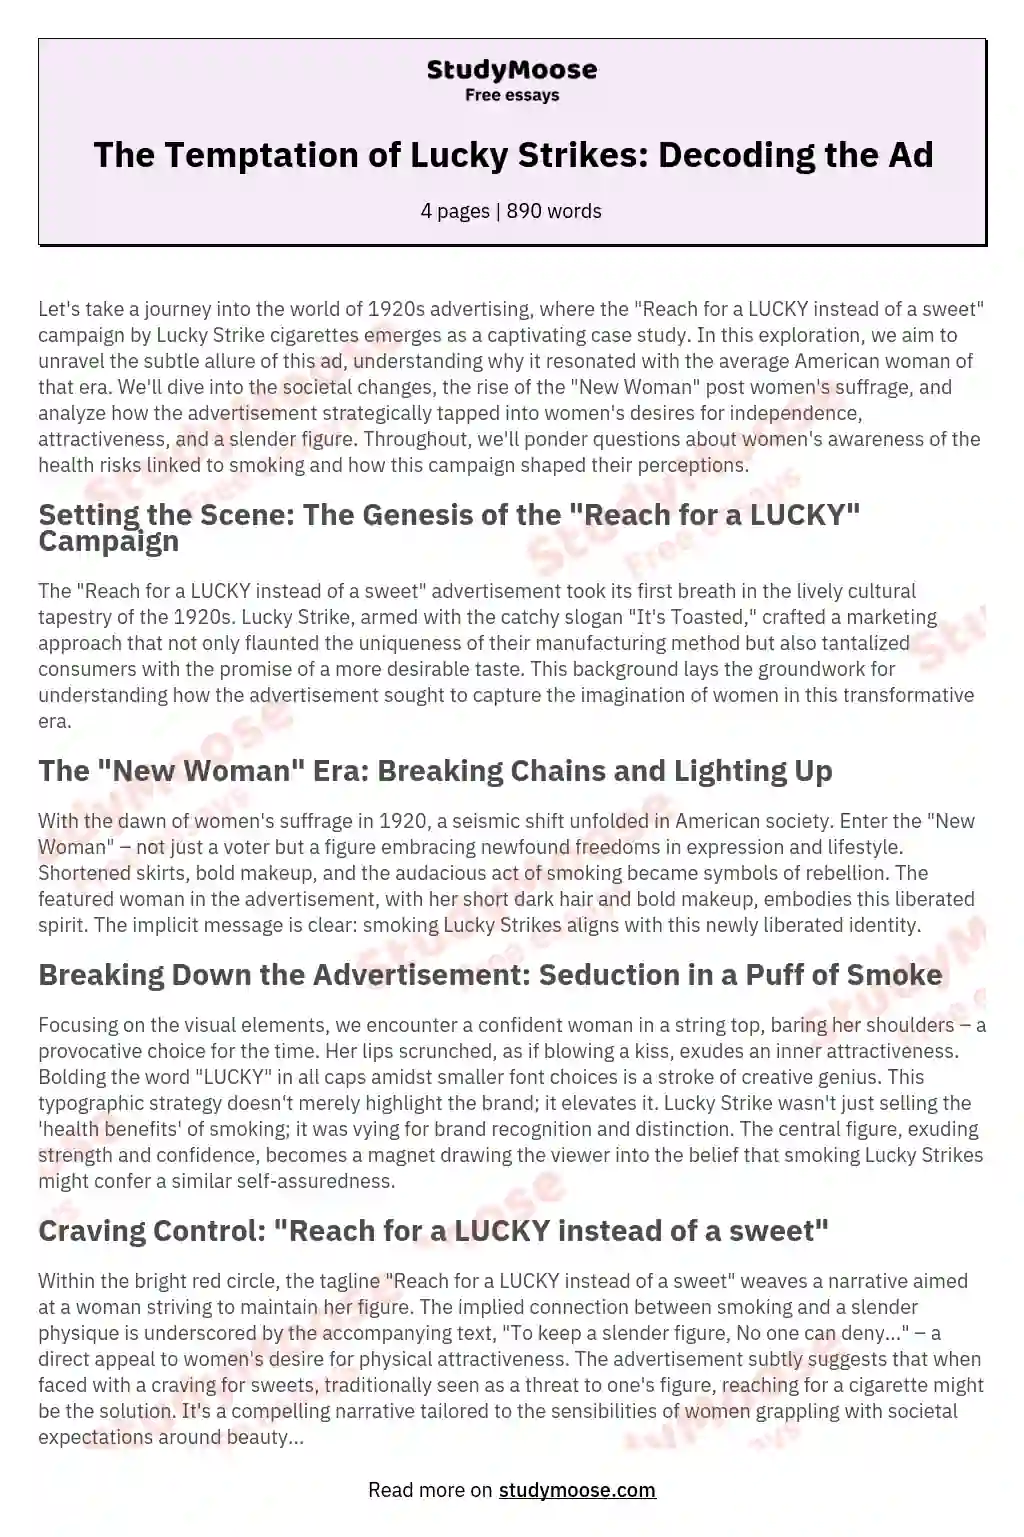 The Temptation of Lucky Strikes: Decoding the Ad essay